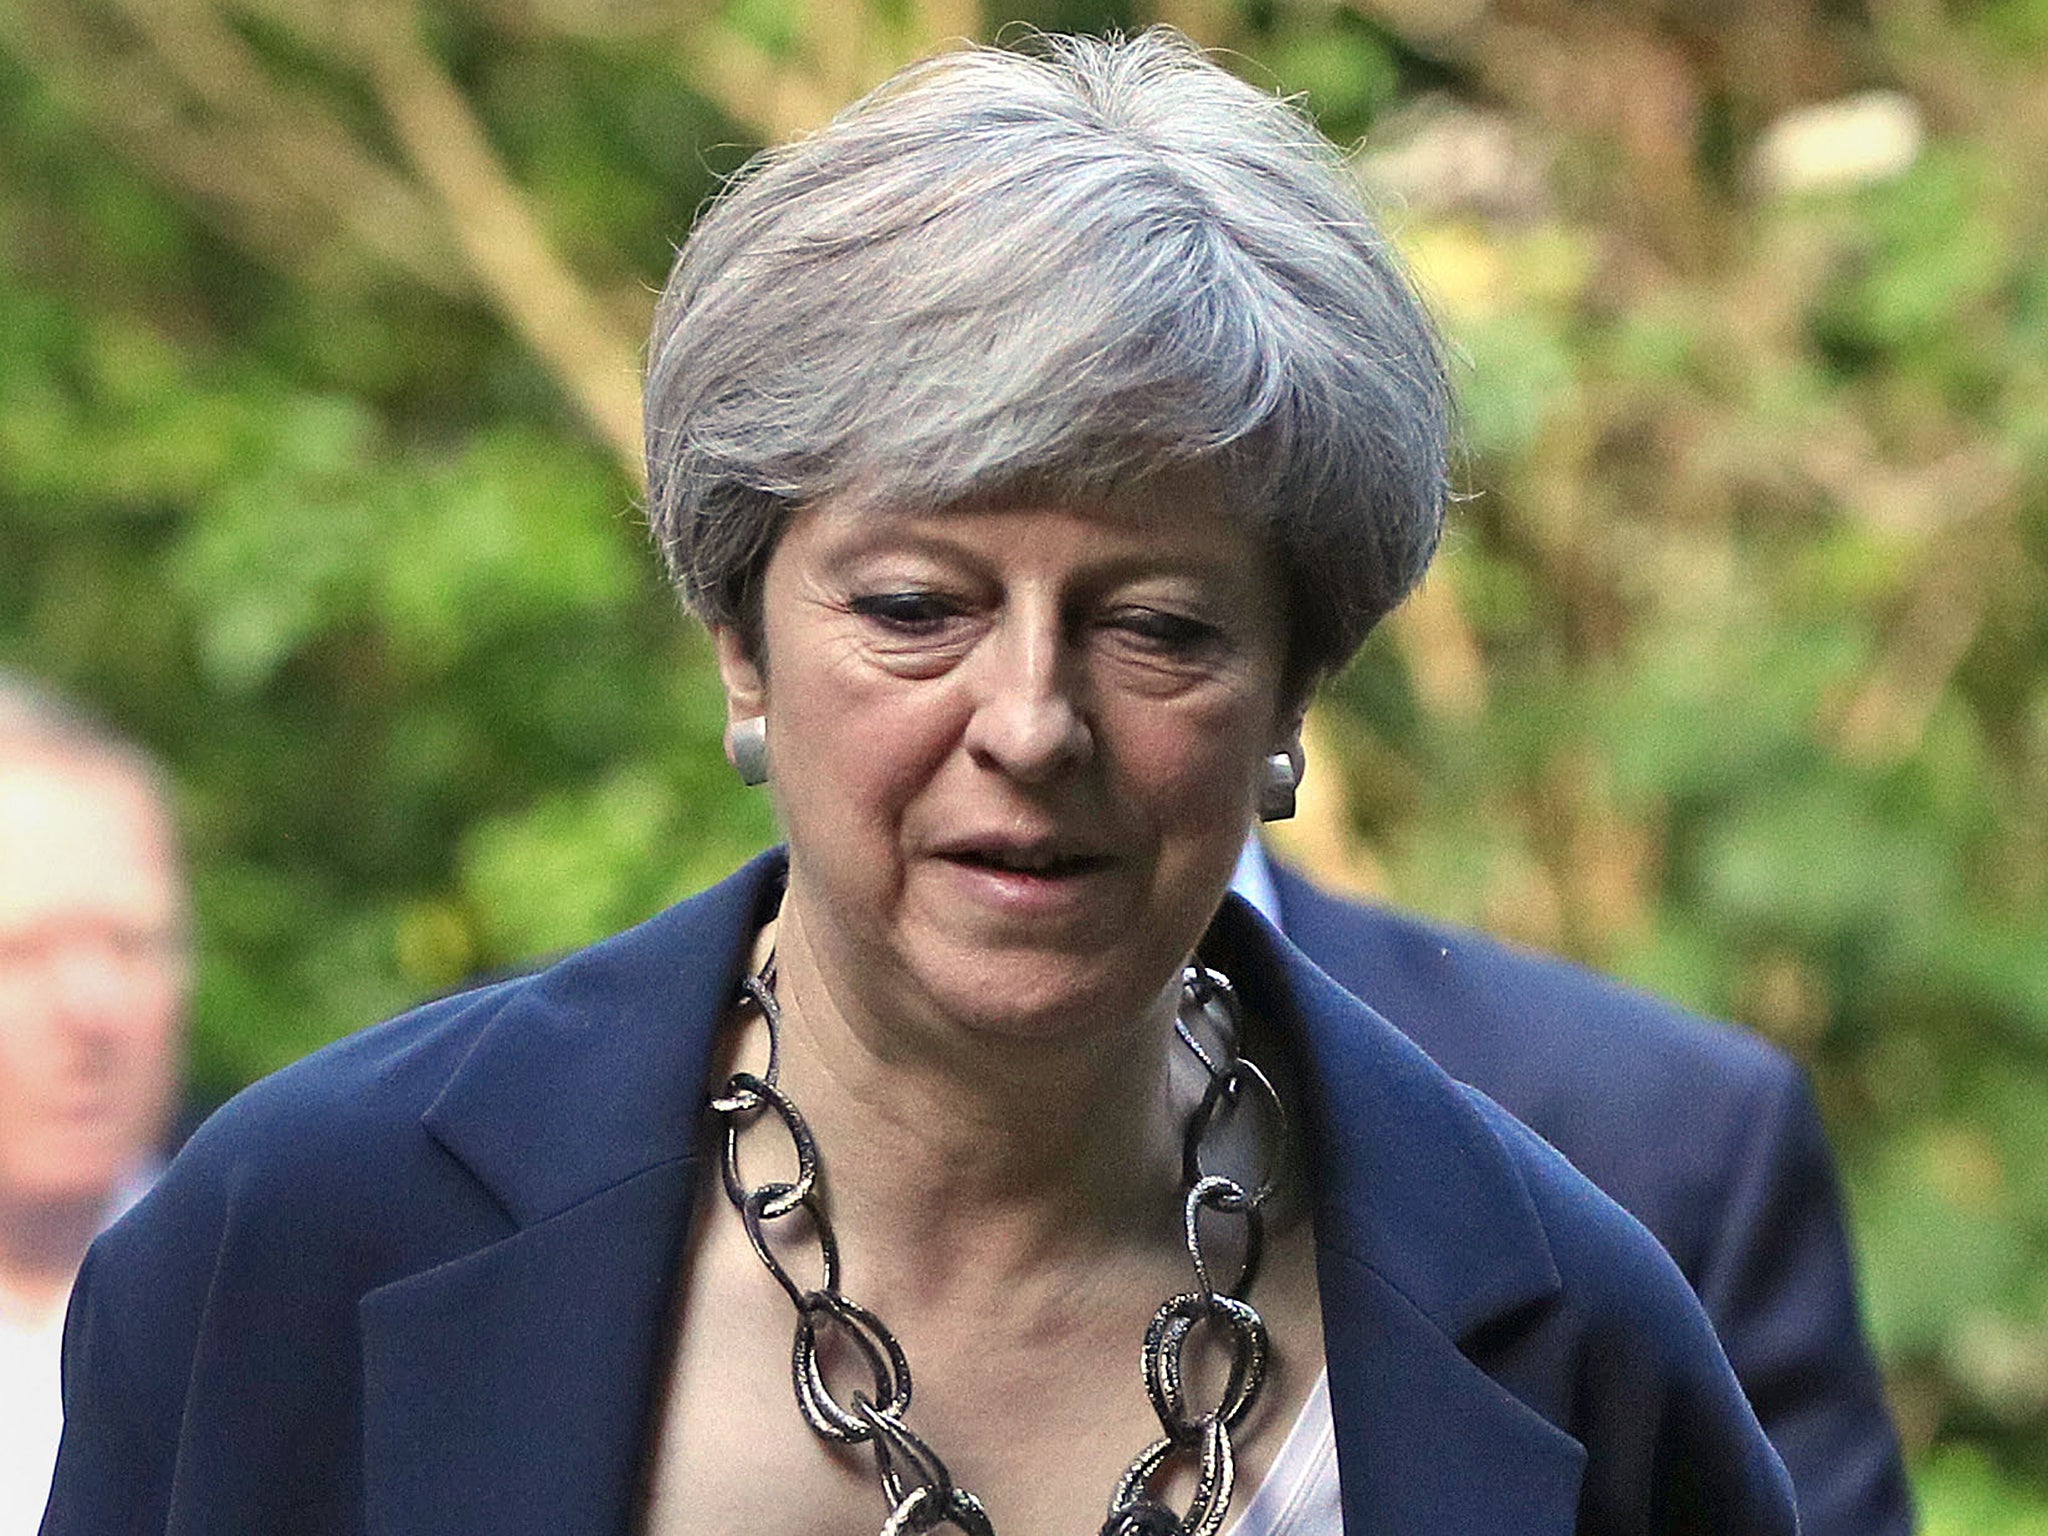 No longer strong or stable: Theresa May's days look numbered